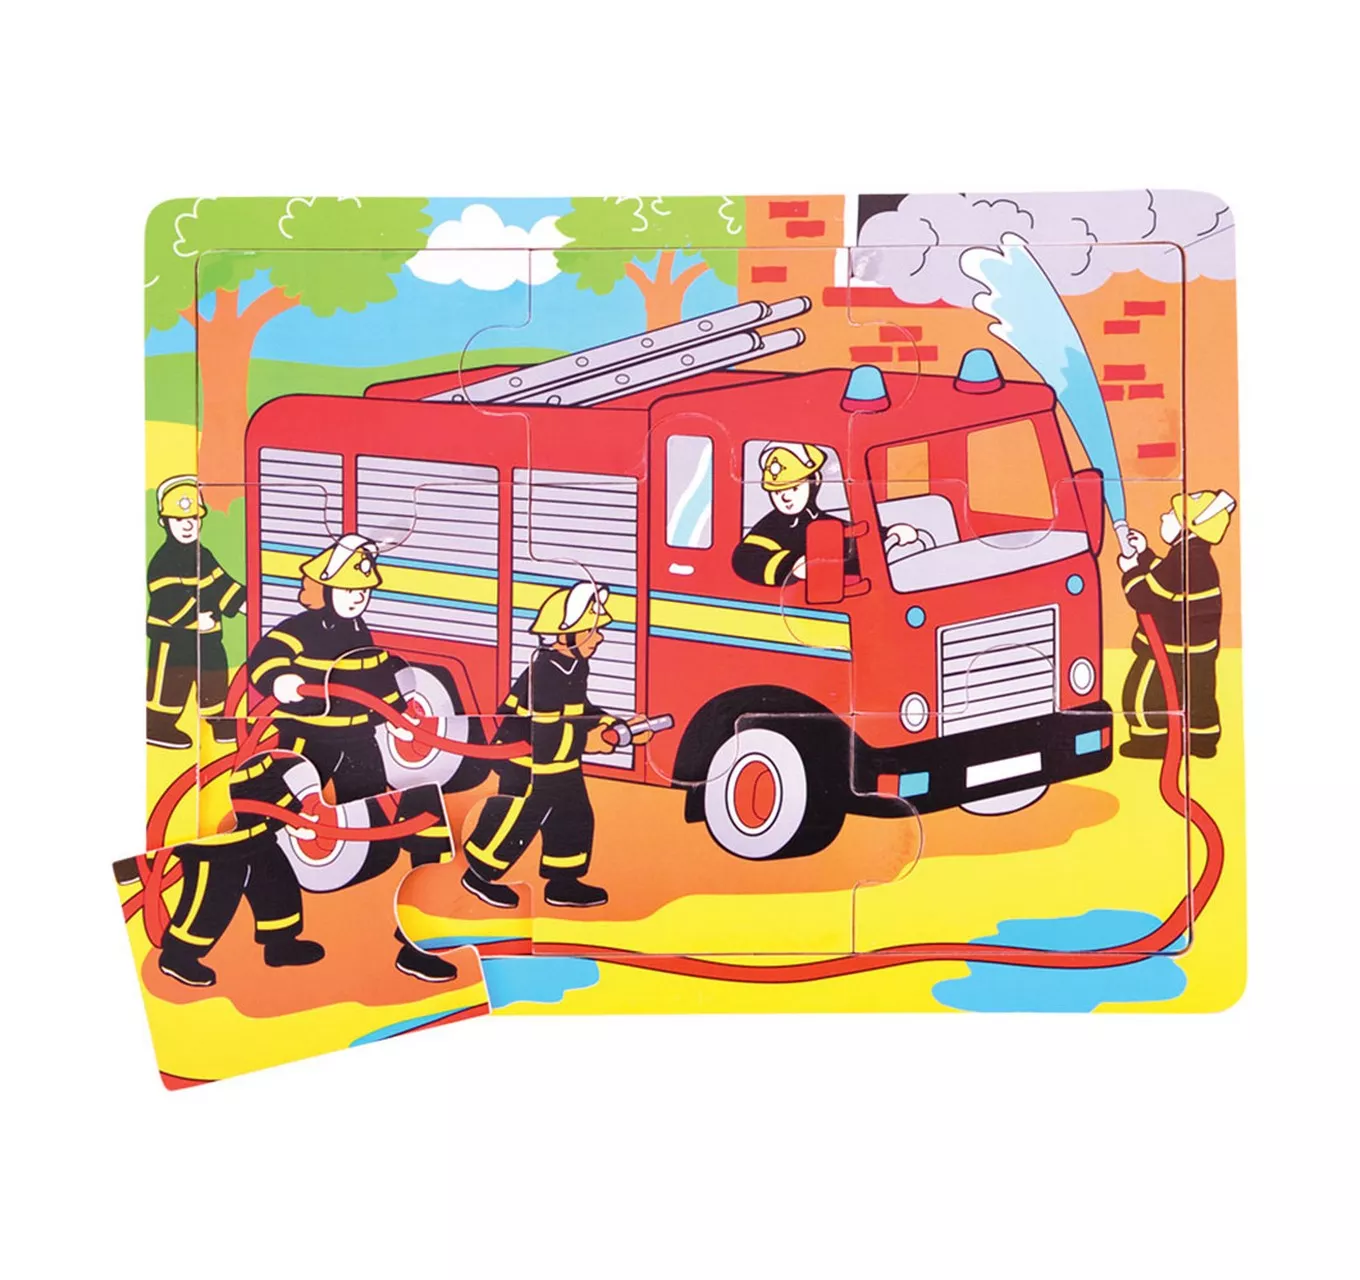 Tray Puzzle - Fire Engine